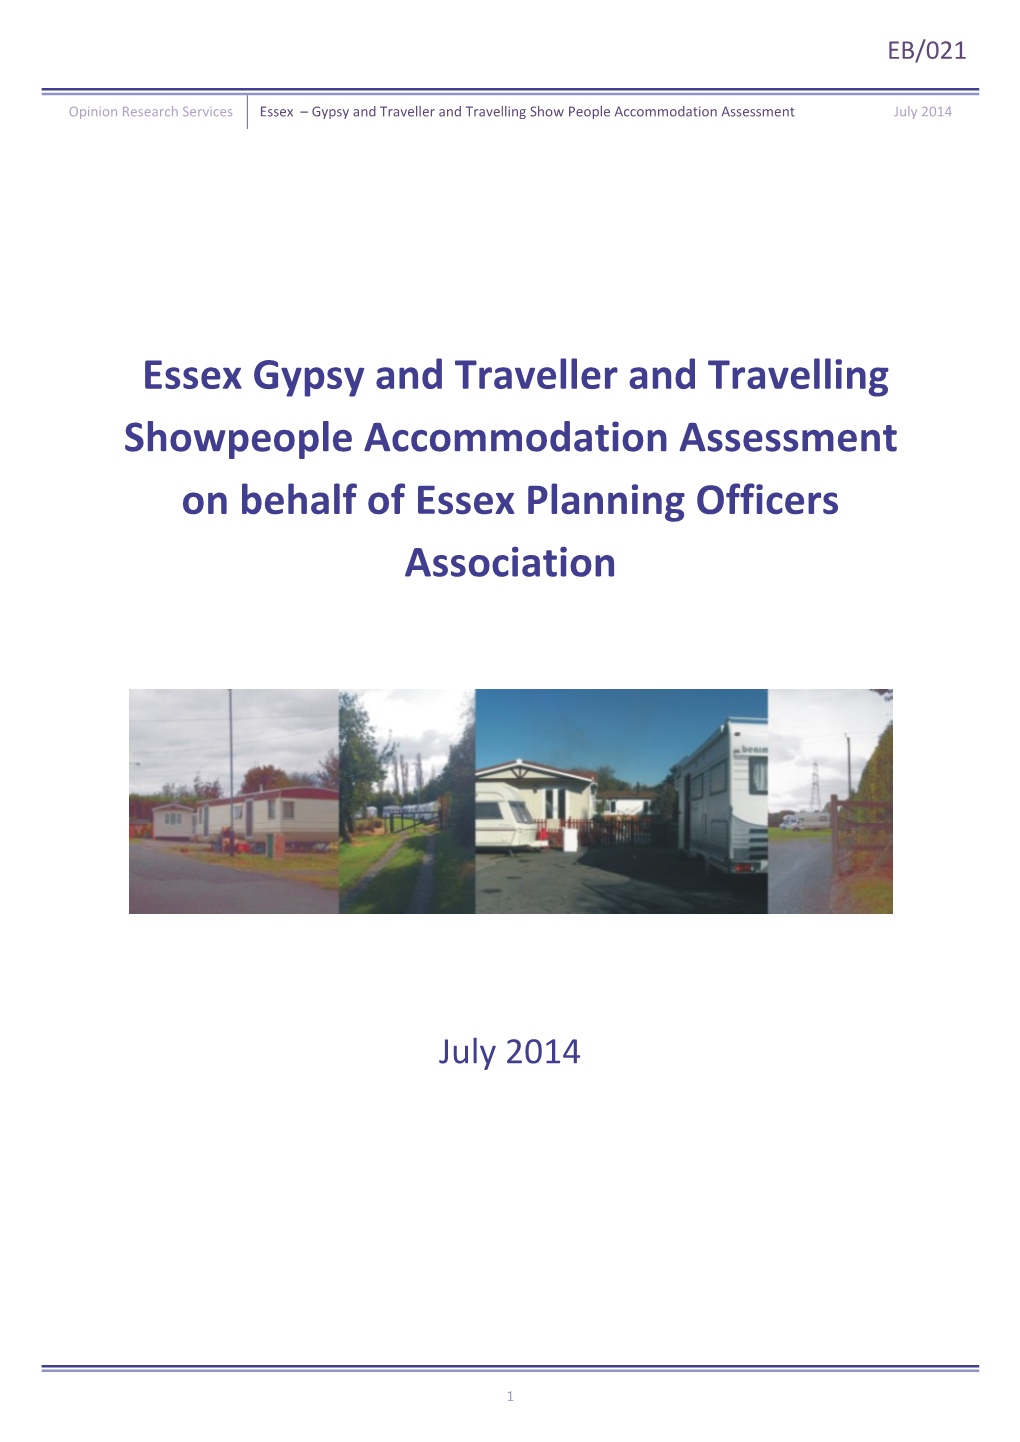 Essex Gypsy and Traveller and Travelling Showpeople Accommodation Assessment on Behalf of Essex Planning Officers Association